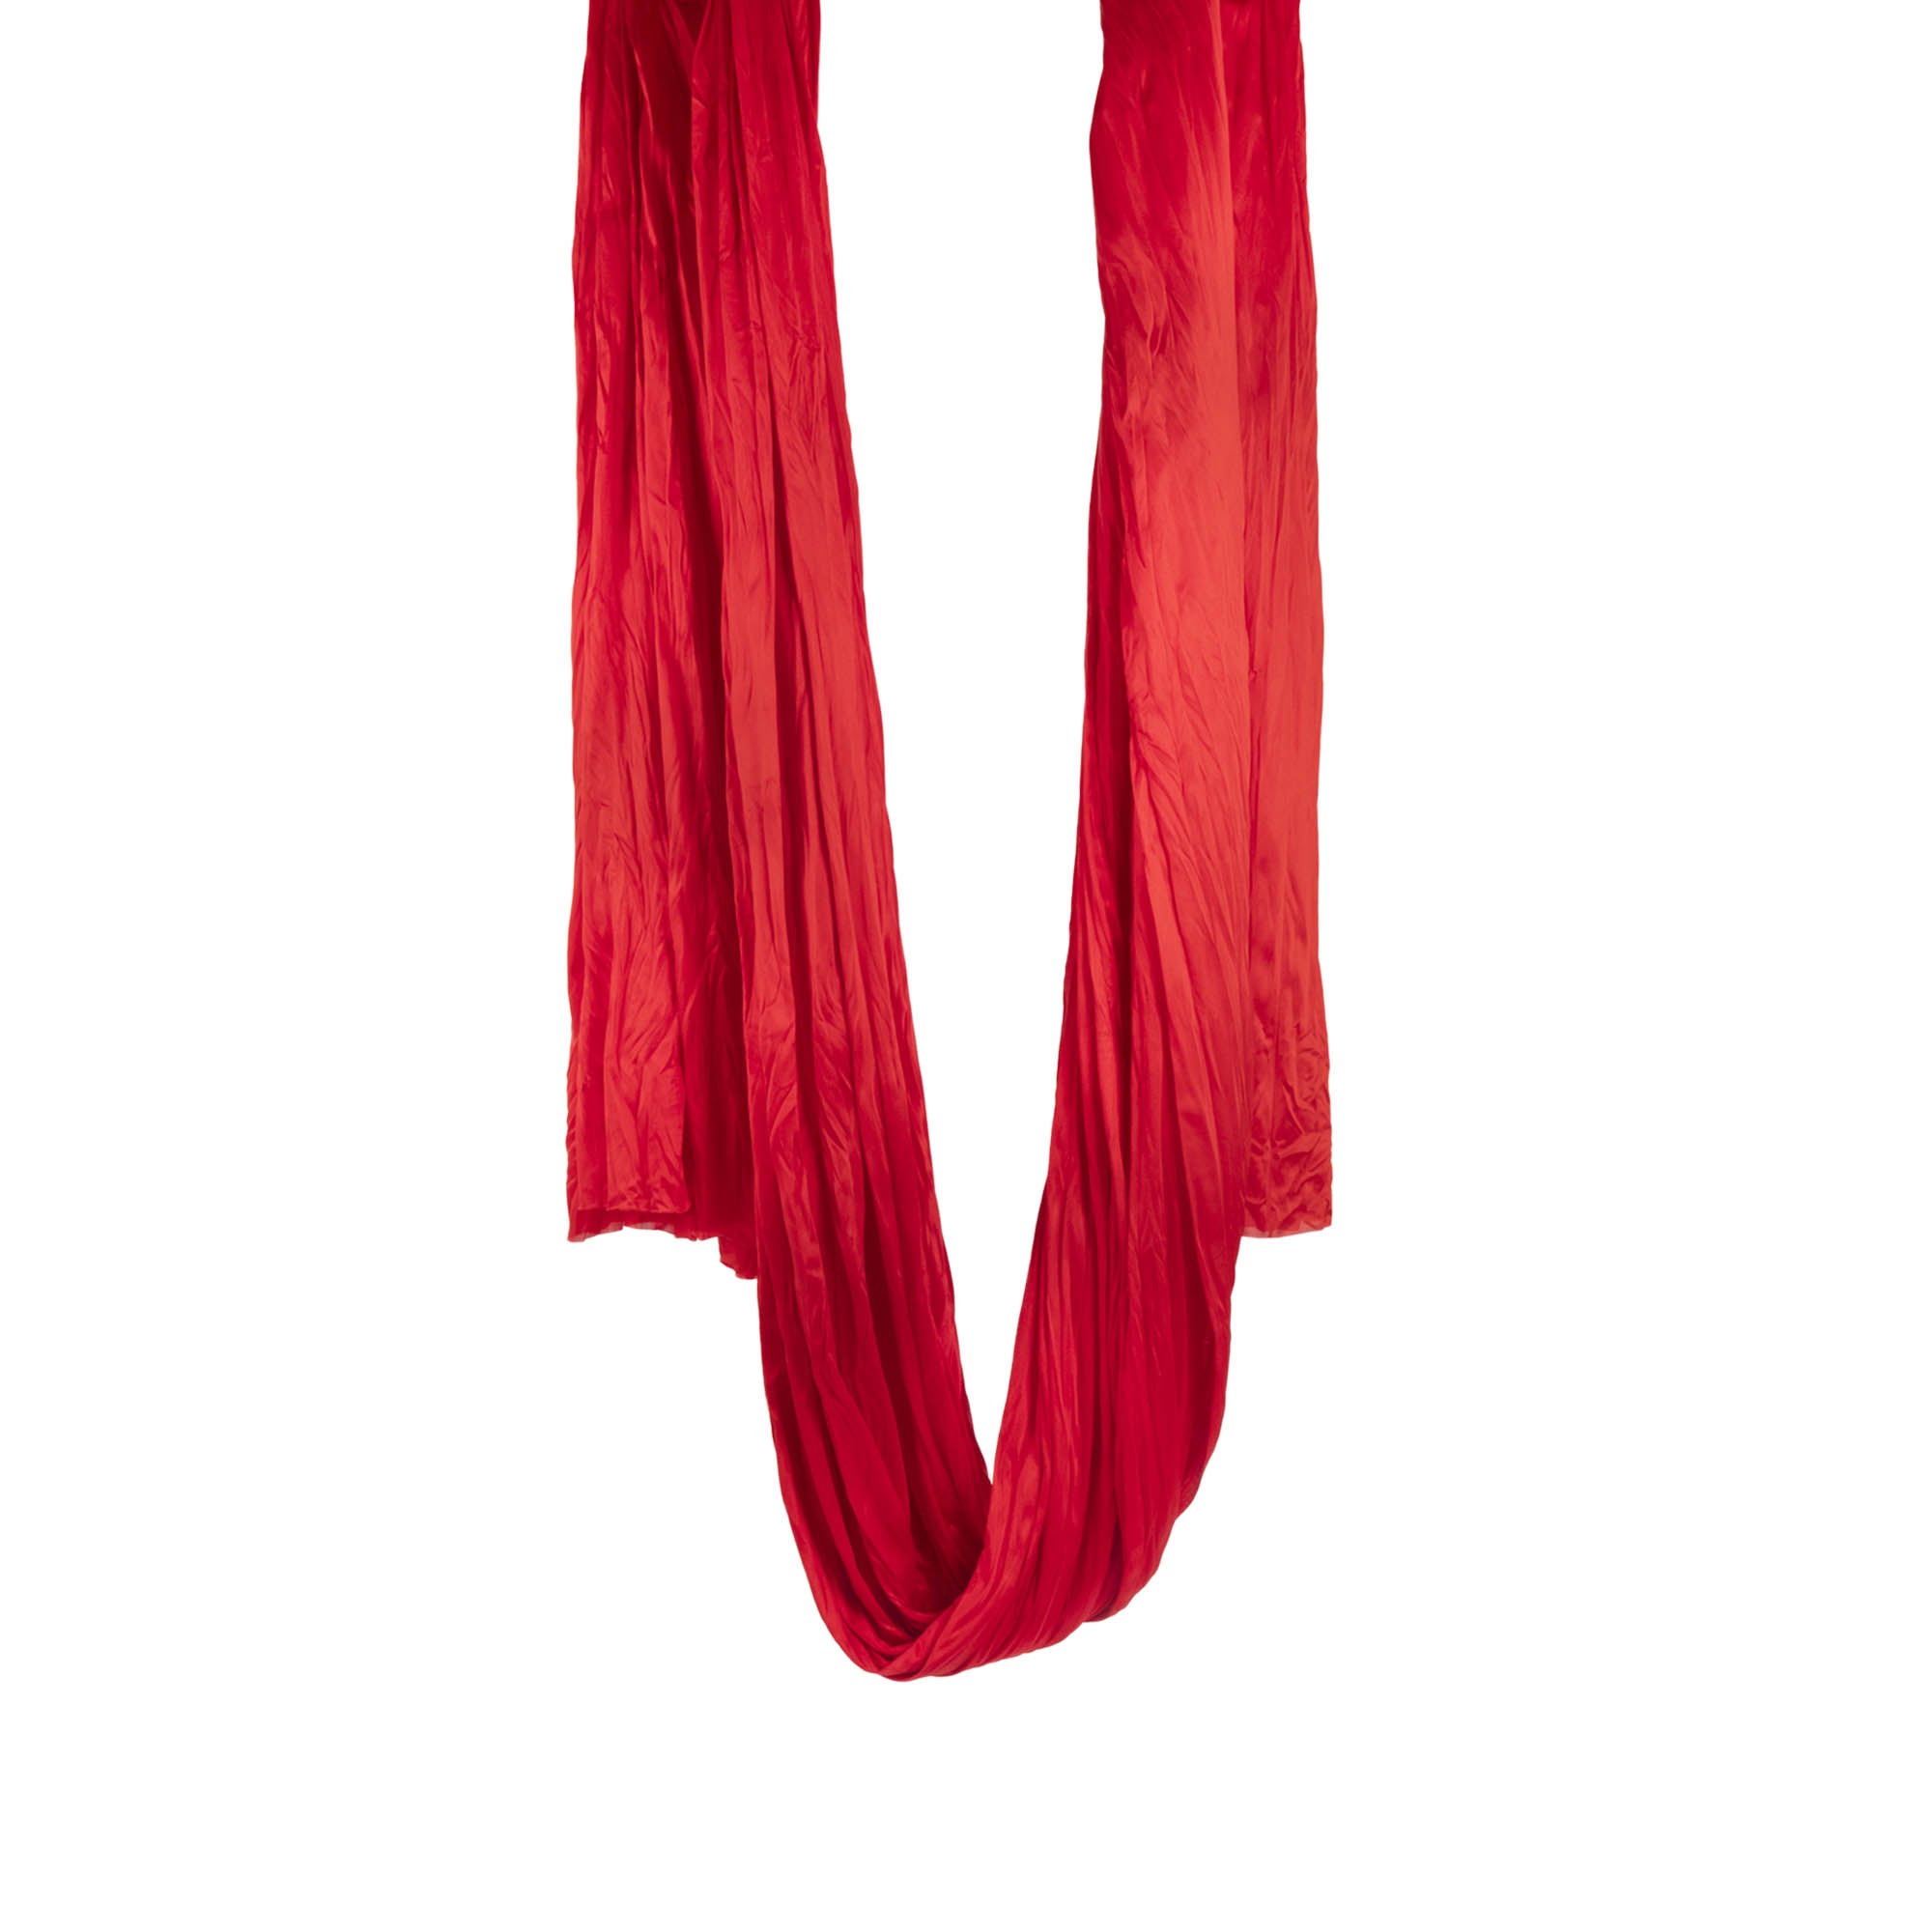 Prodigy 6m aerial yoga hammock in red hanging